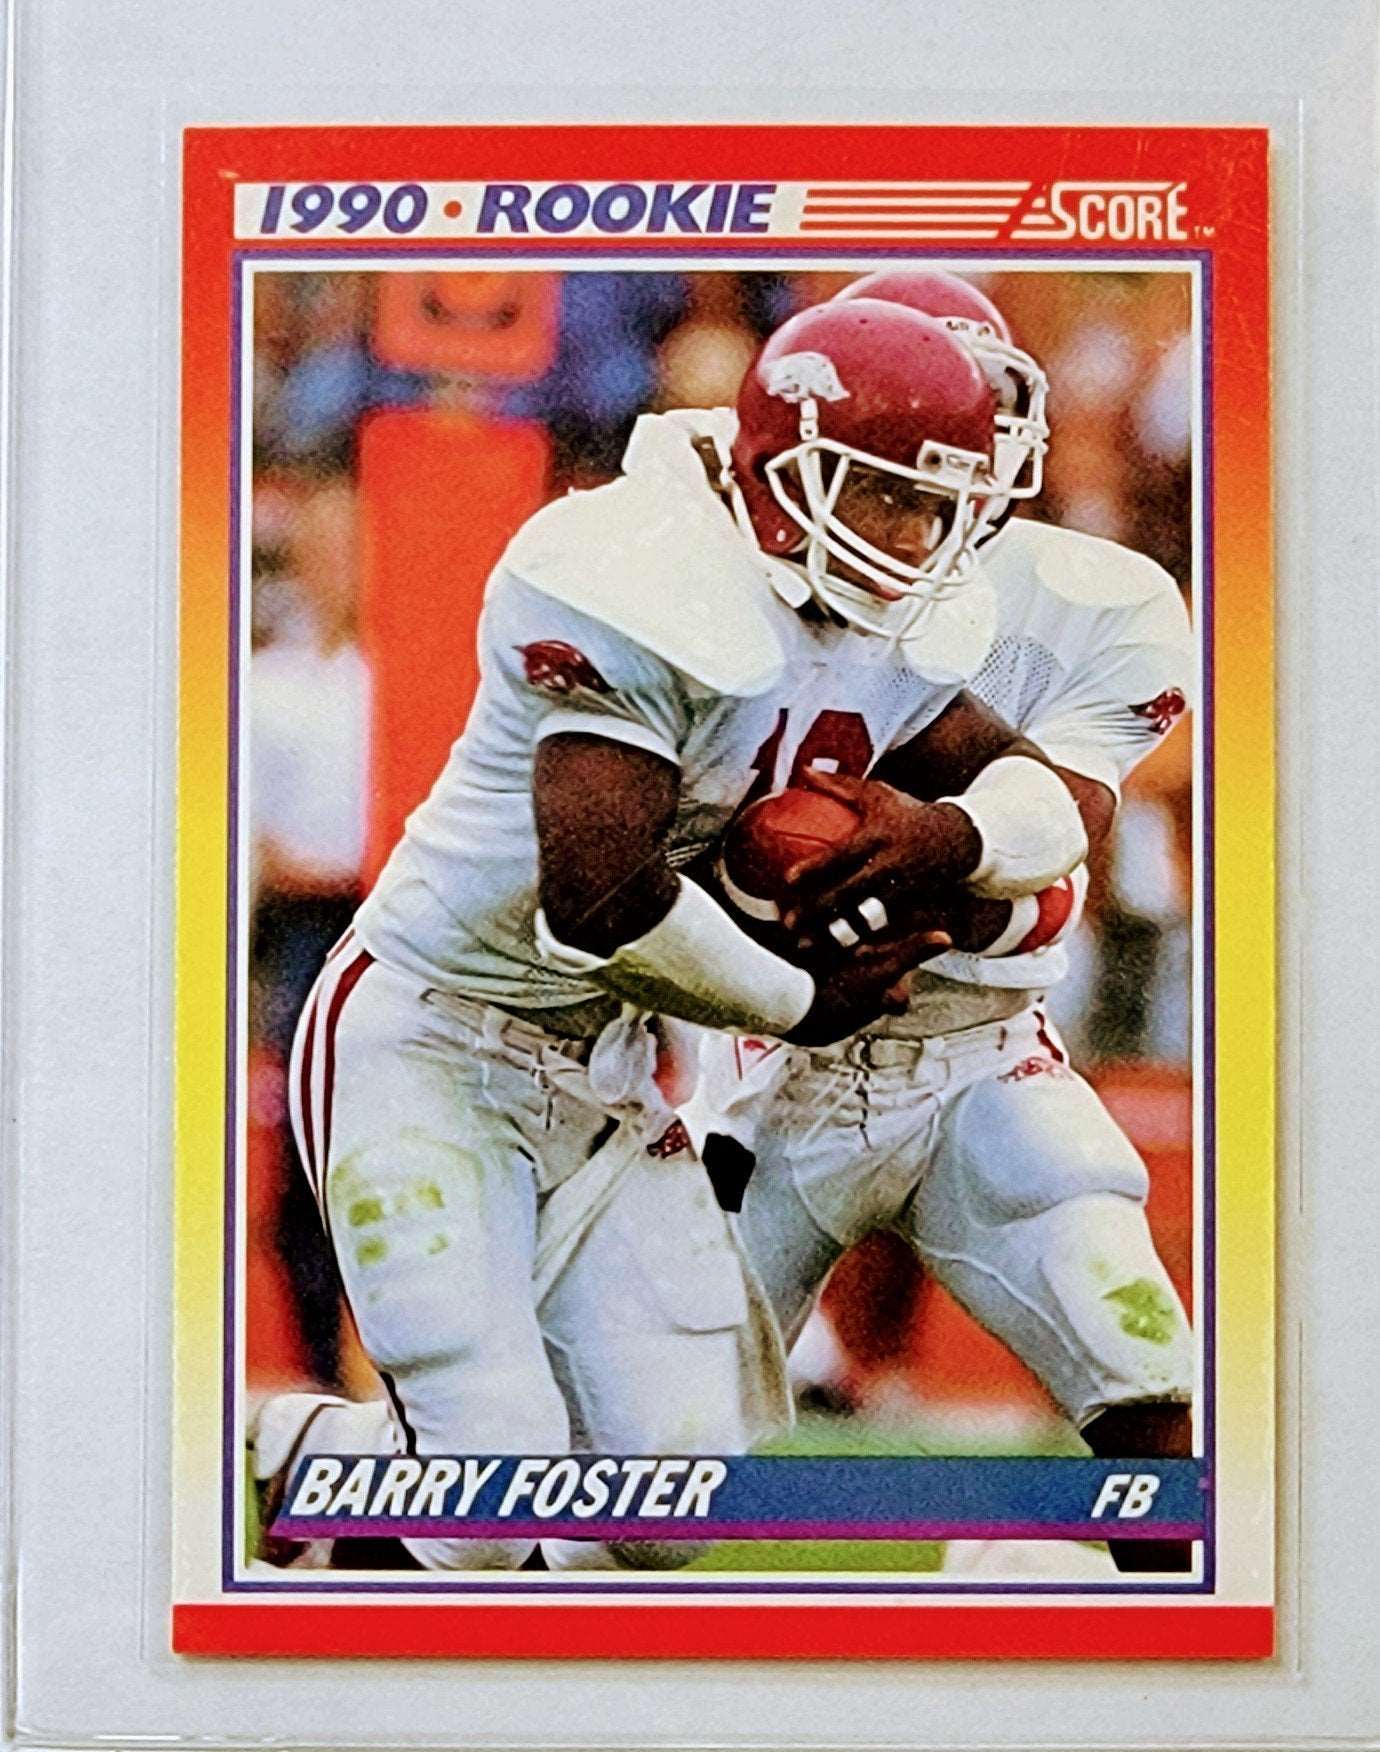 1990 Score Barry Foster Rookie Football Card AVM1 simple Xclusive Collectibles   